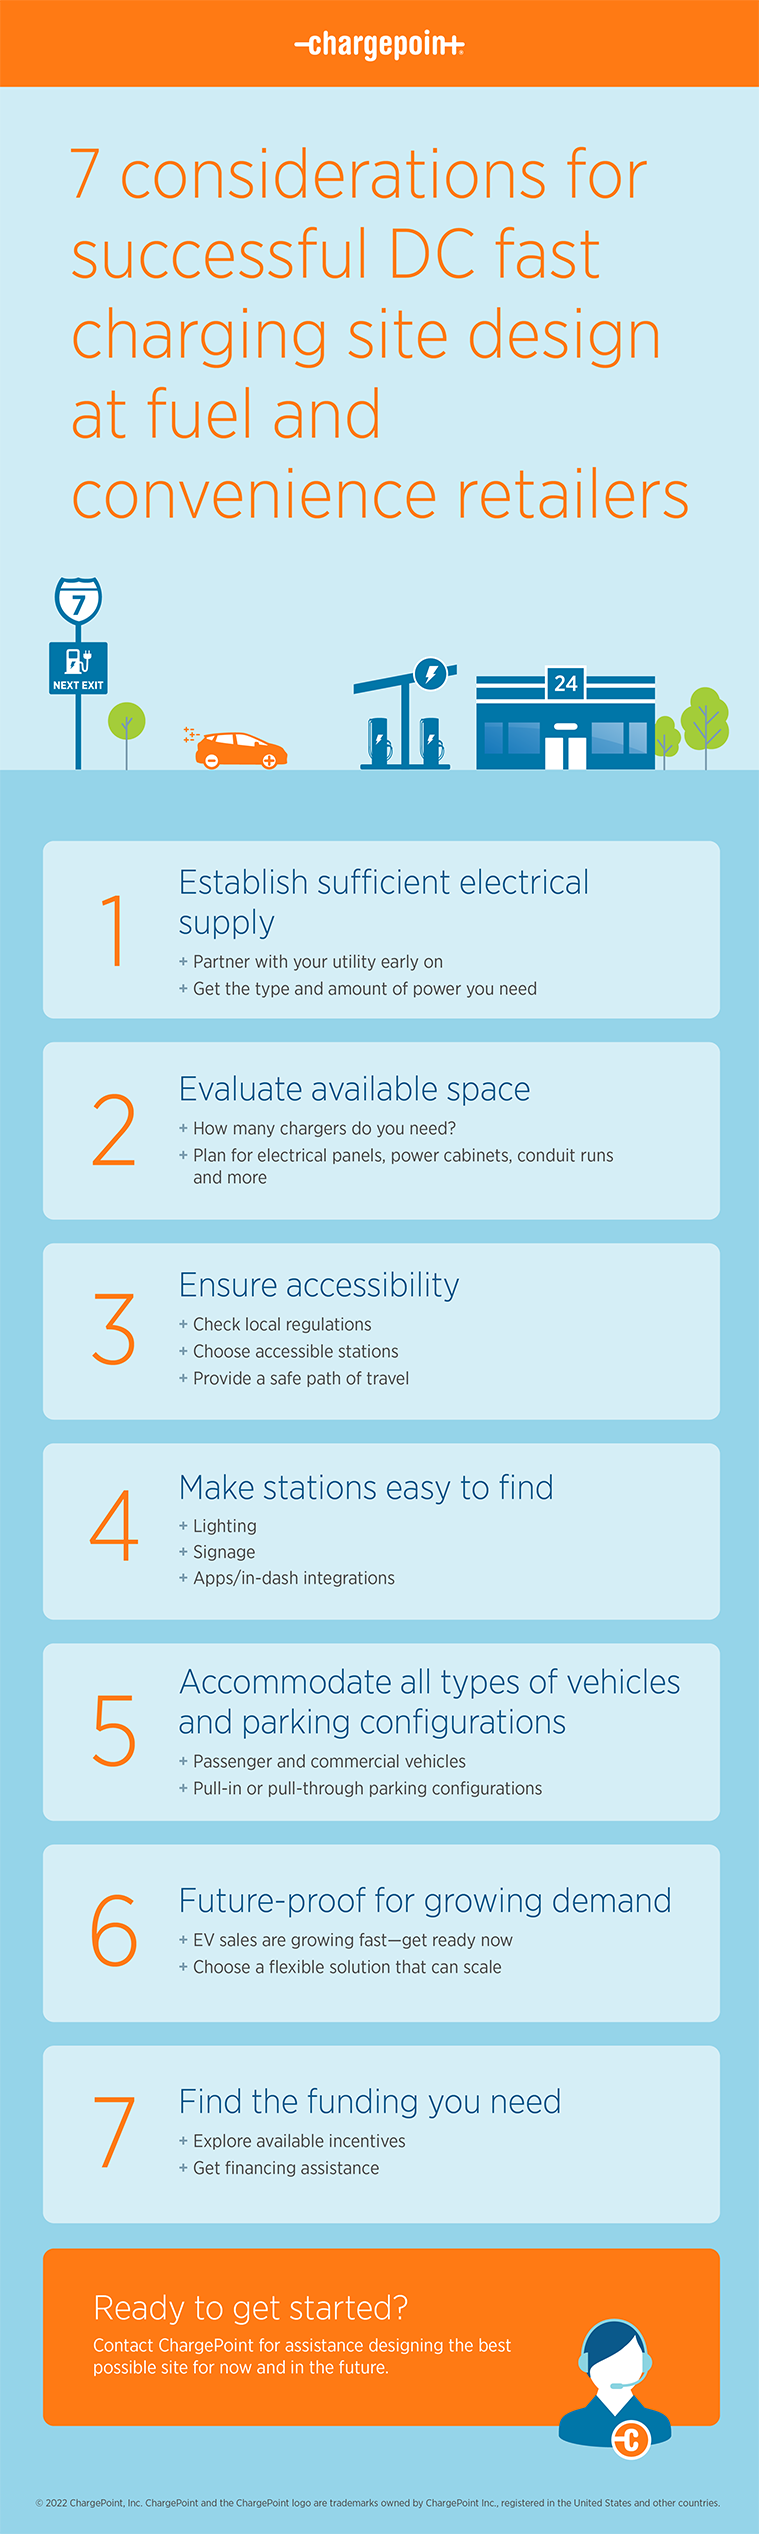 7 considerations for successful EV charging site design infographic